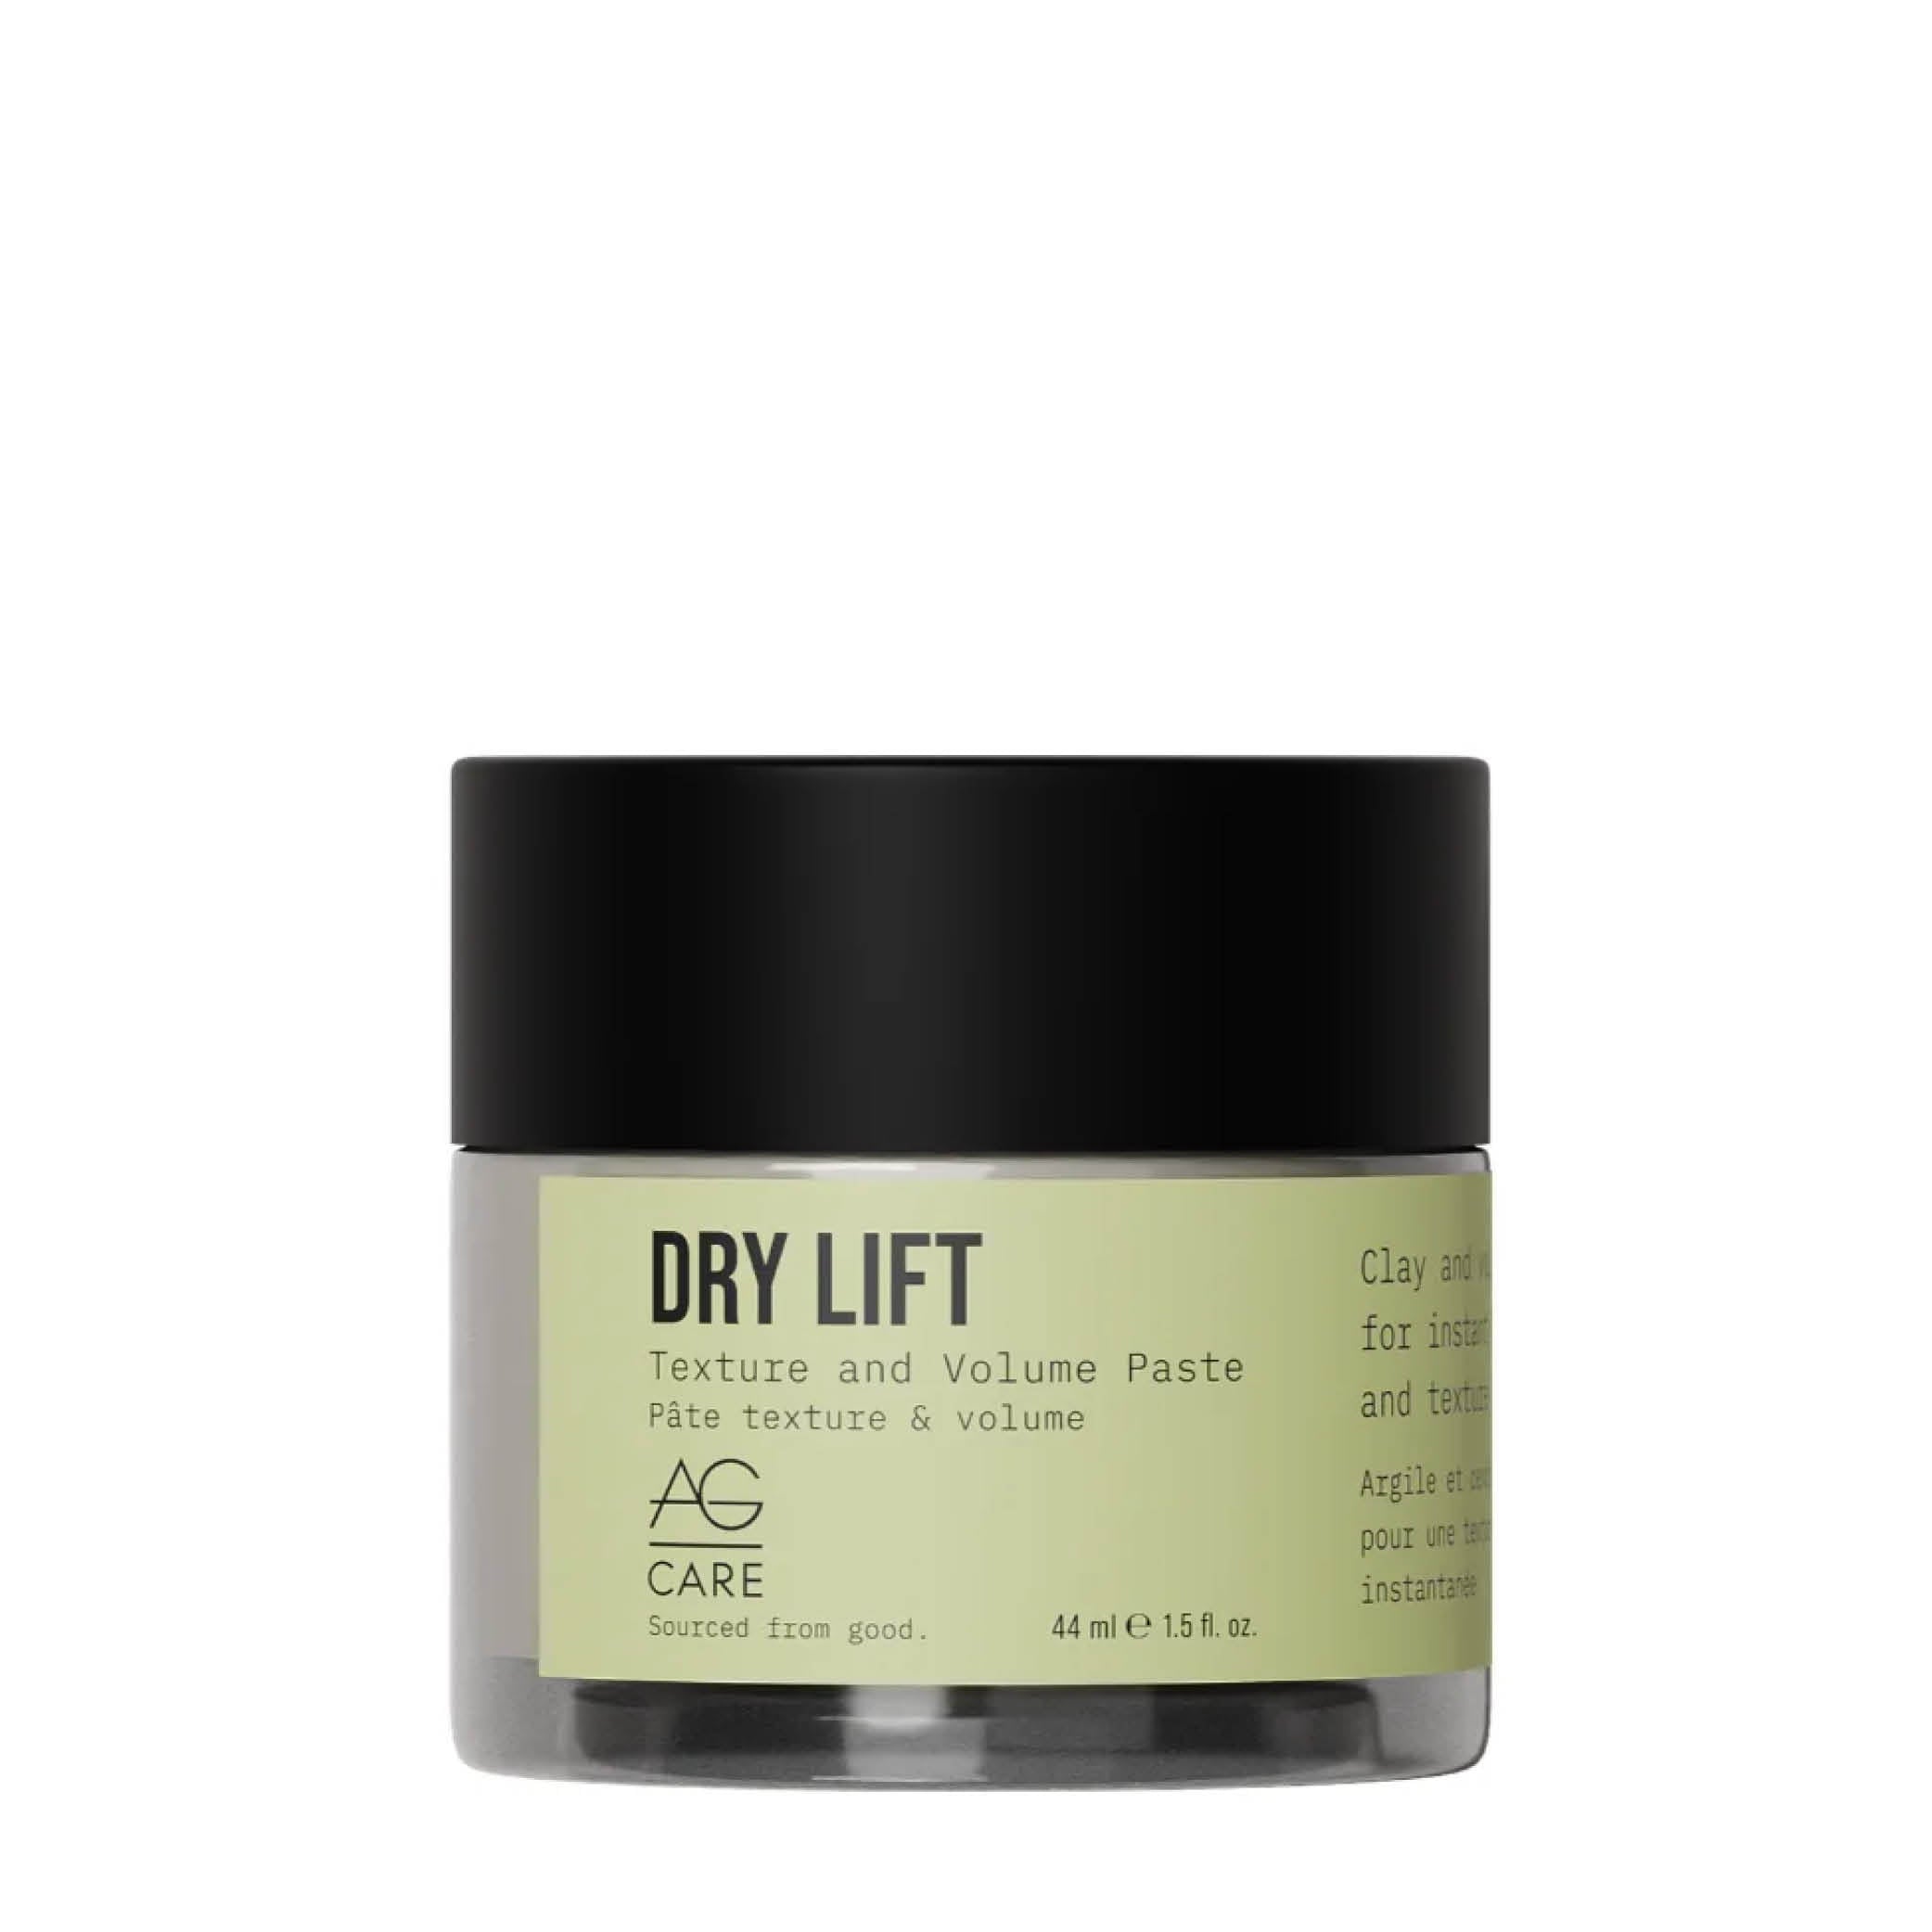 Dry Lift Texture And Volume Paste